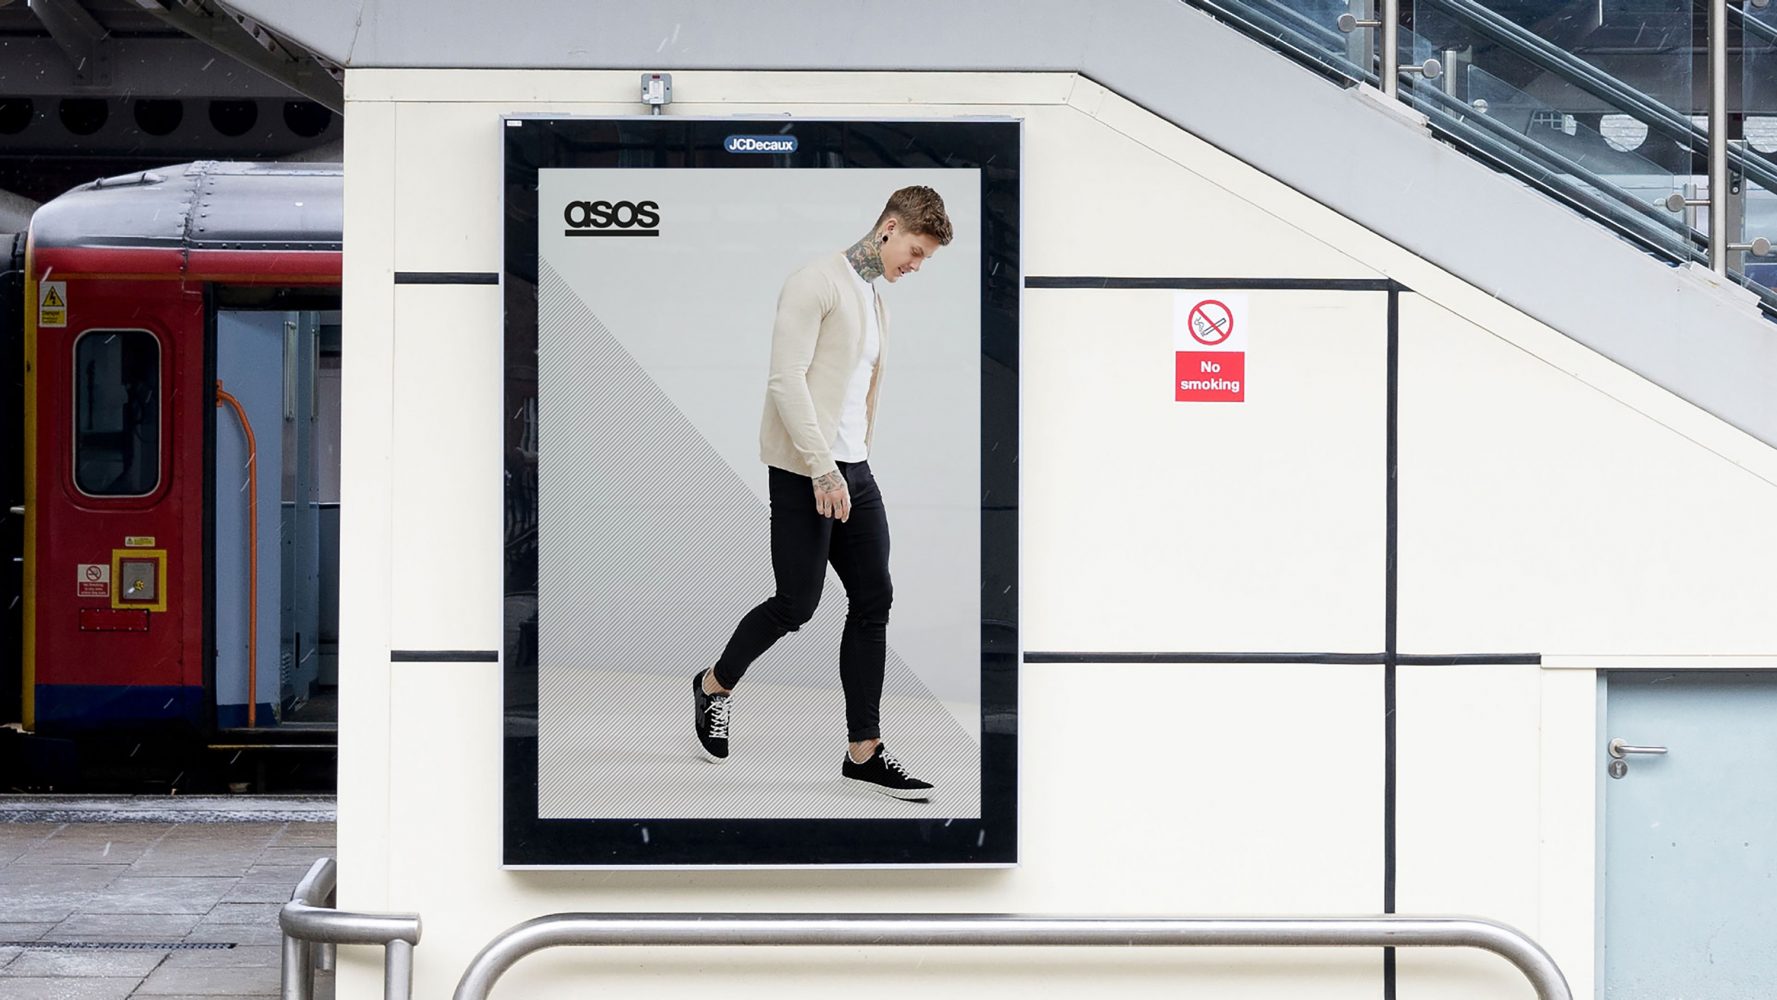 ASOS poster at the train station, brand identity, labelling and packaging design by Household.